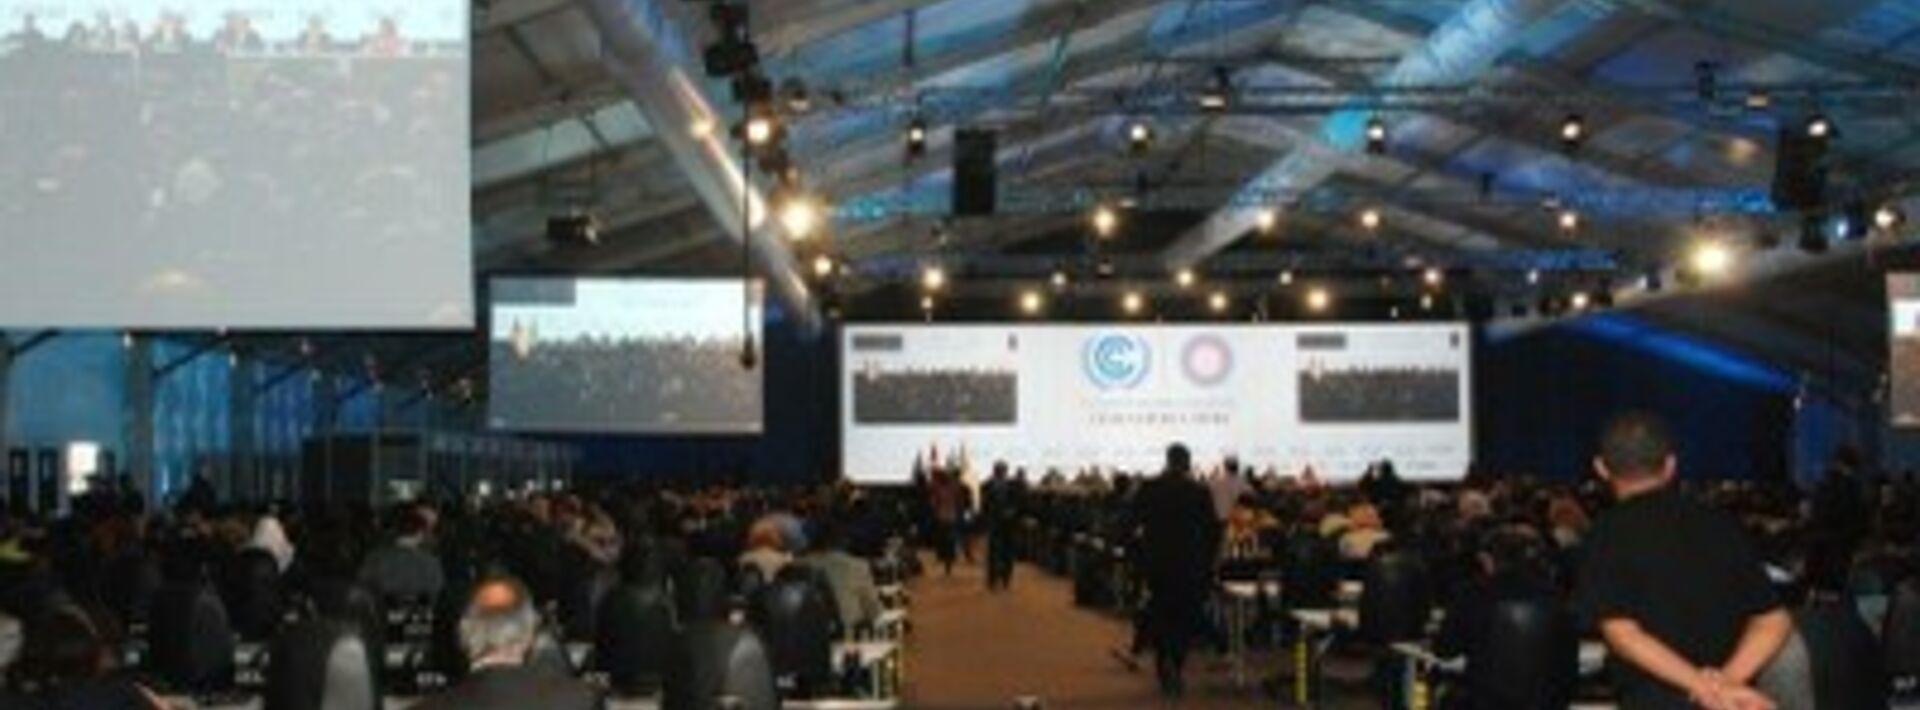 COP20: Costa Rica announces goal to cover 100% of its electricity needs with renewables  